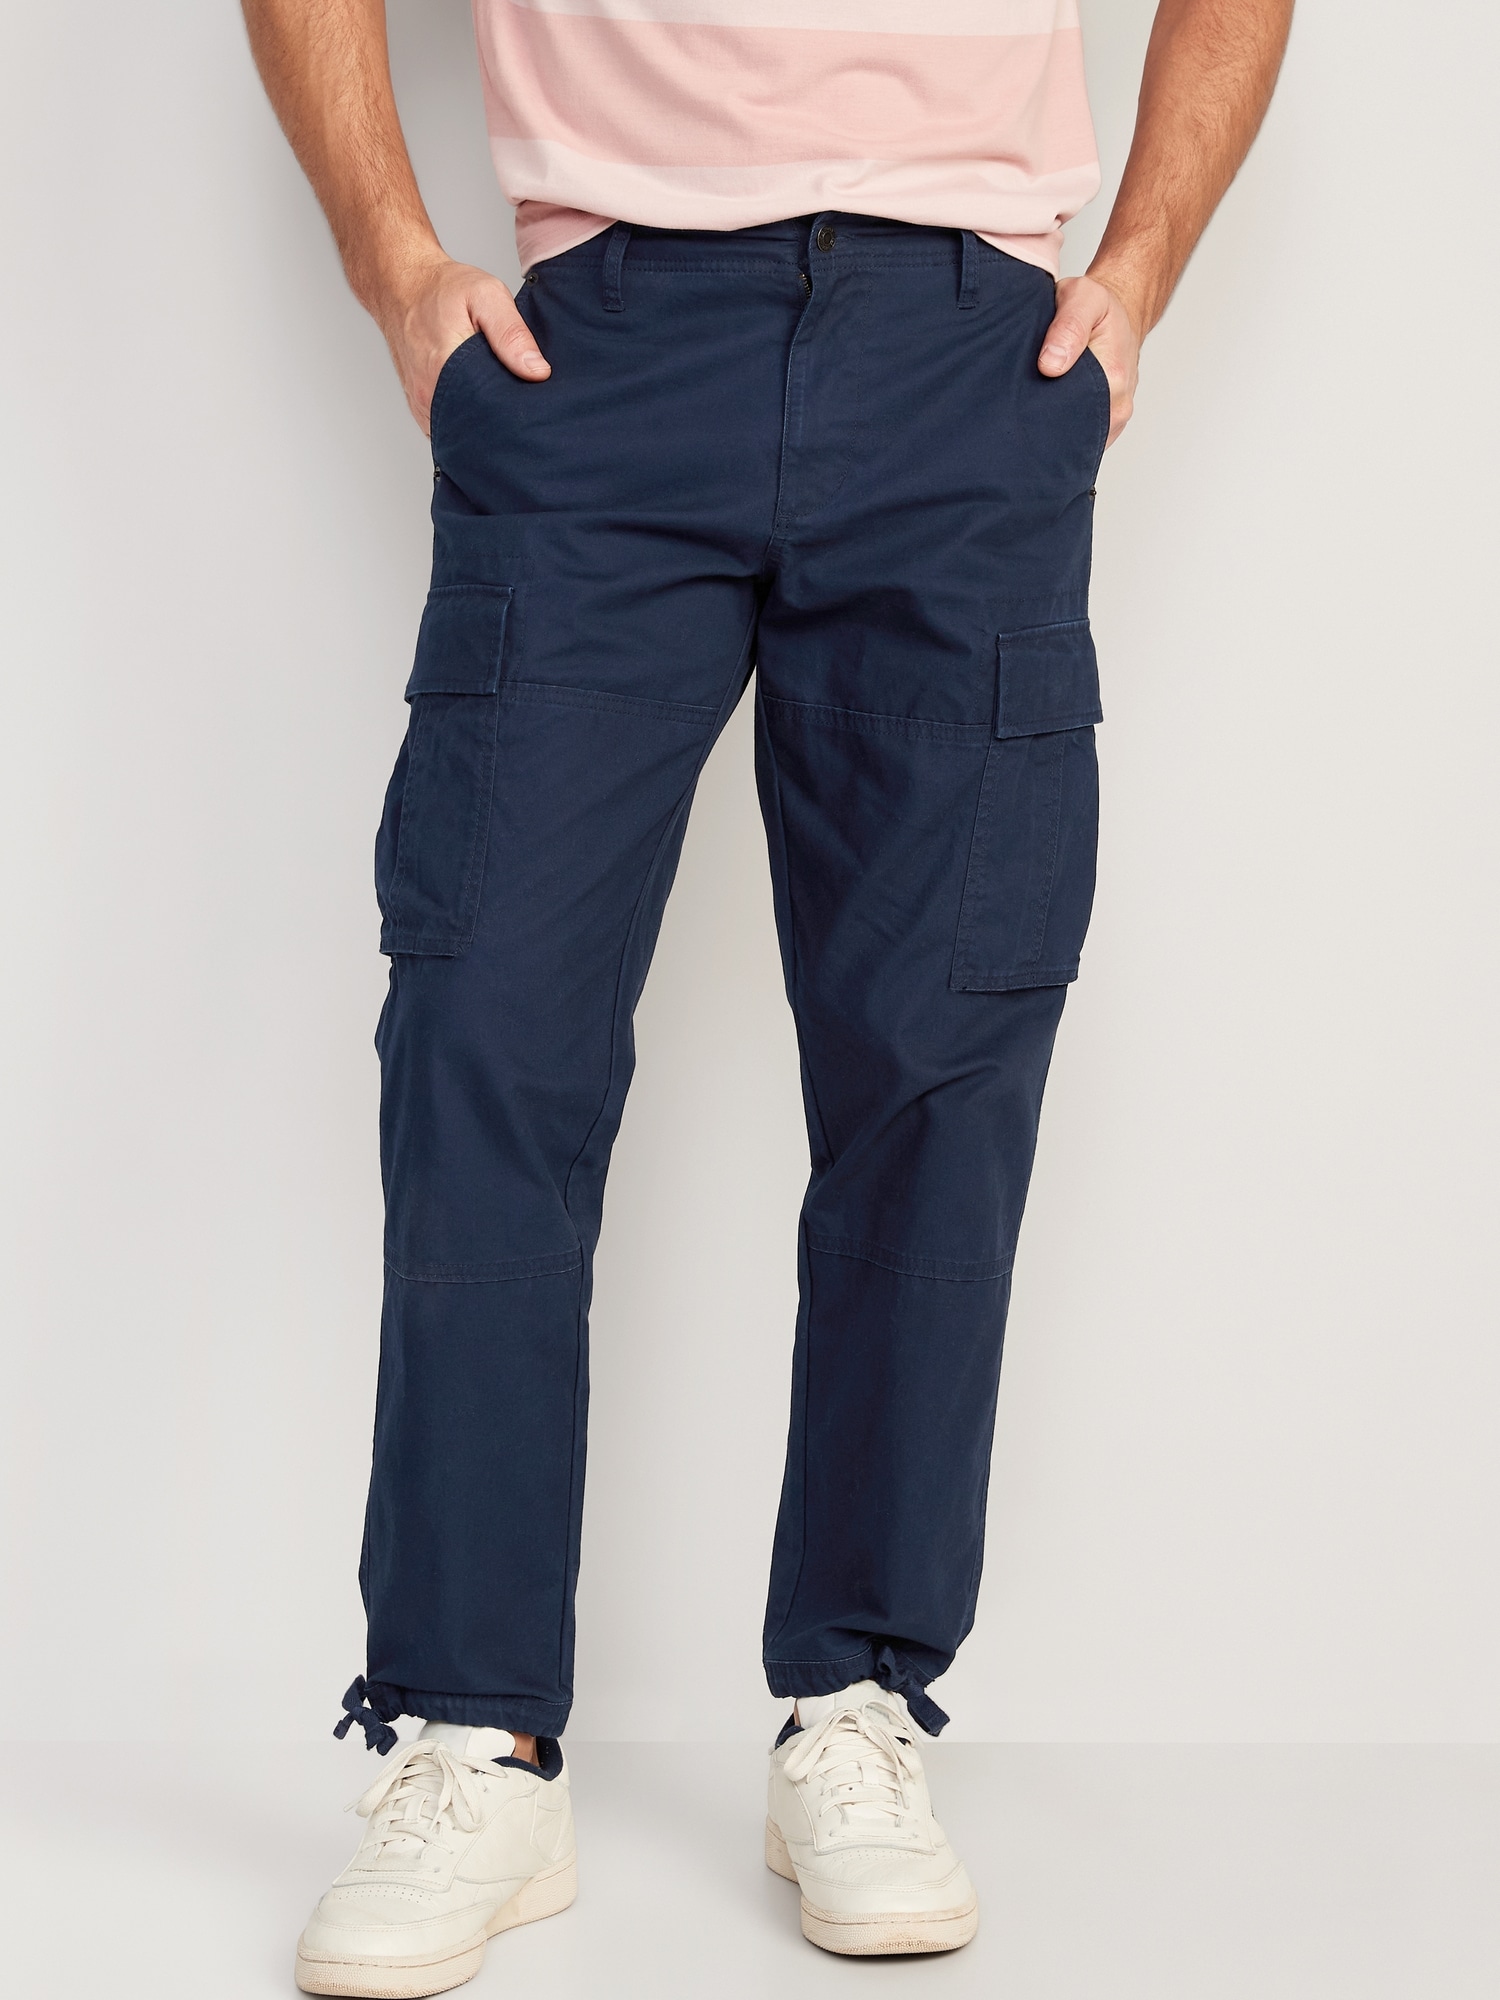 Loose Taper Non-Stretch '94 Cargo Pants | Old Navy